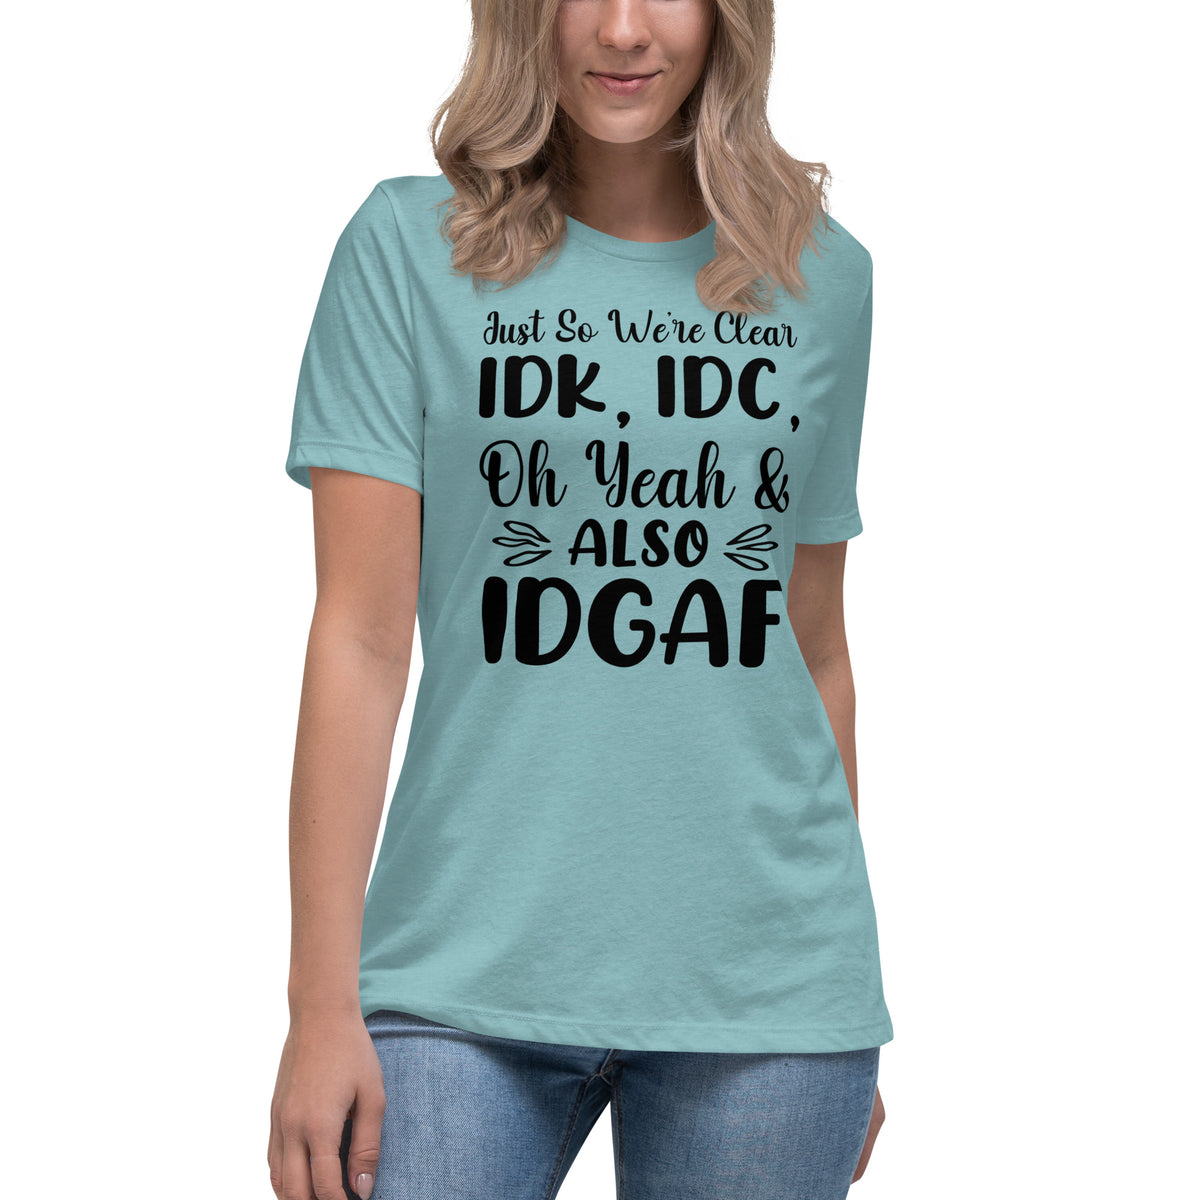 I Don't Know, I Don't Care and IDGAF Women's Relaxed T-Shirt